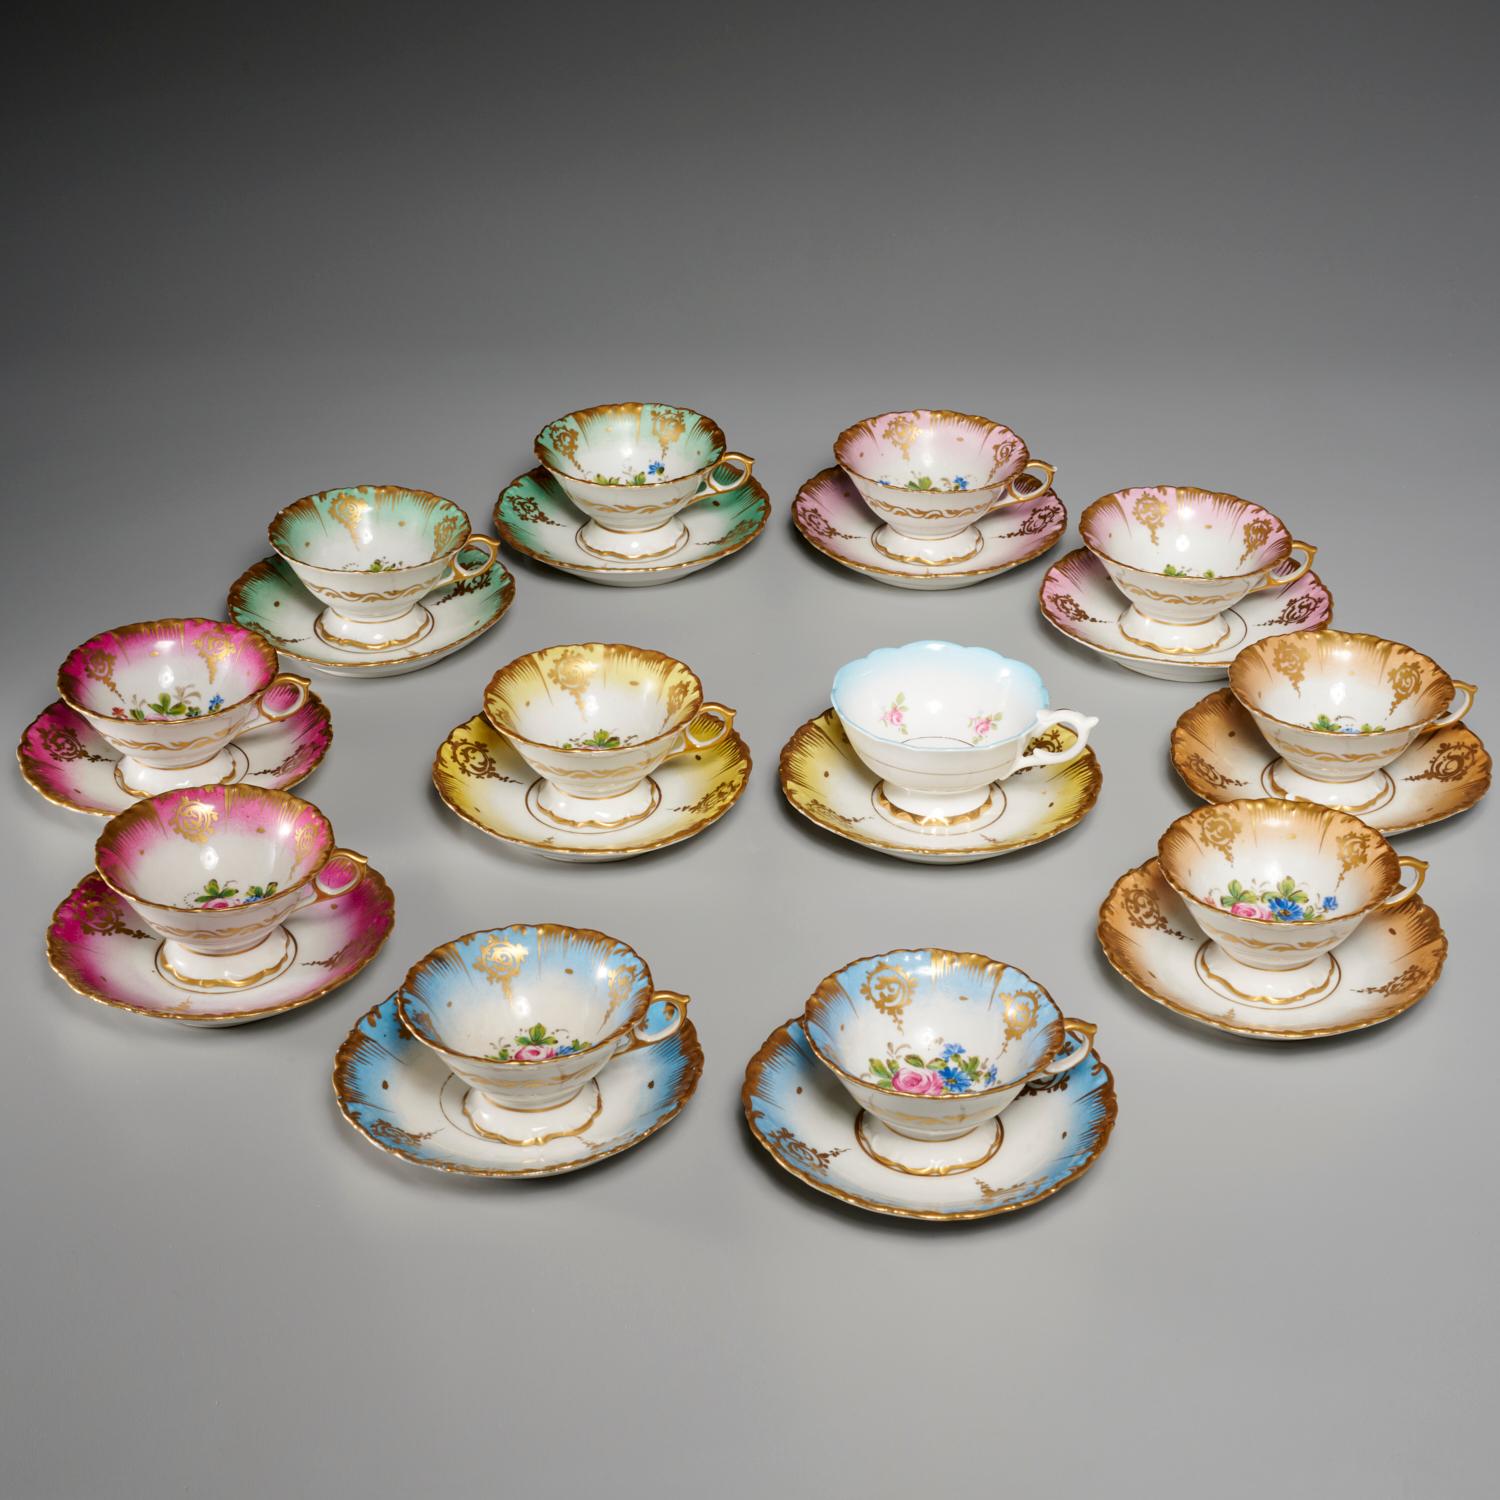 20th c., France, gilt and painted porcelain dessert service. The set is decorated with pink rose clusters on various color grounds and gold accented scallop moulded borders. 

Dimensions and quantity:
Set comprises: 
12 cups, 2